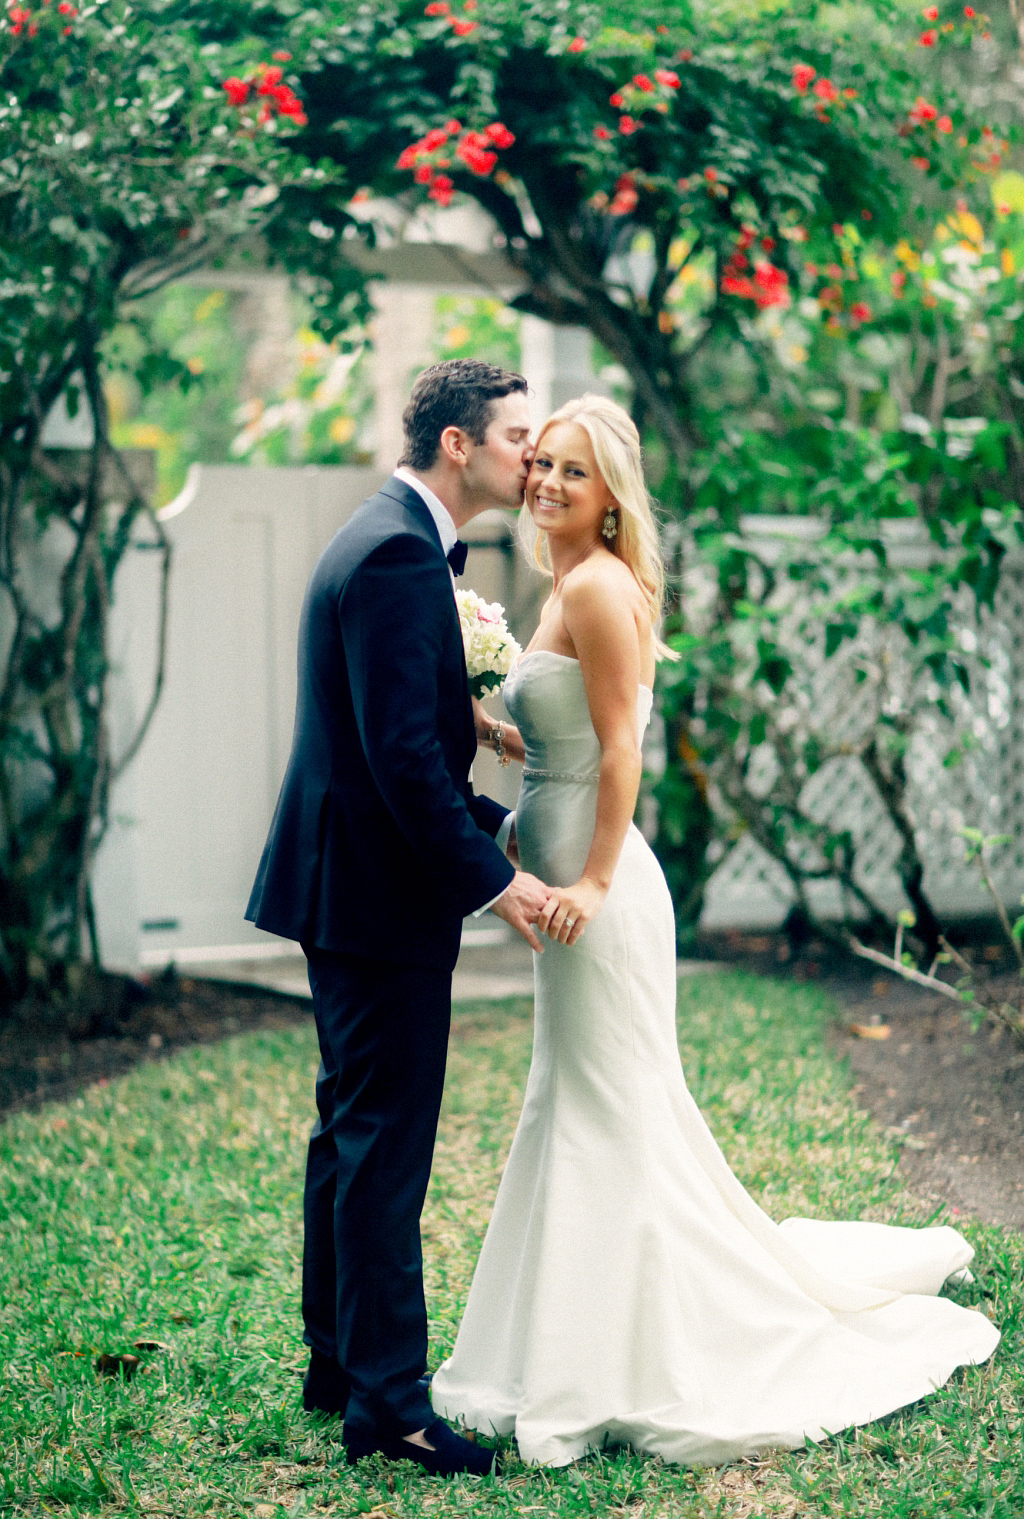 » Fine Art Wedding Photography featuring weddings from Orlando, Tampa